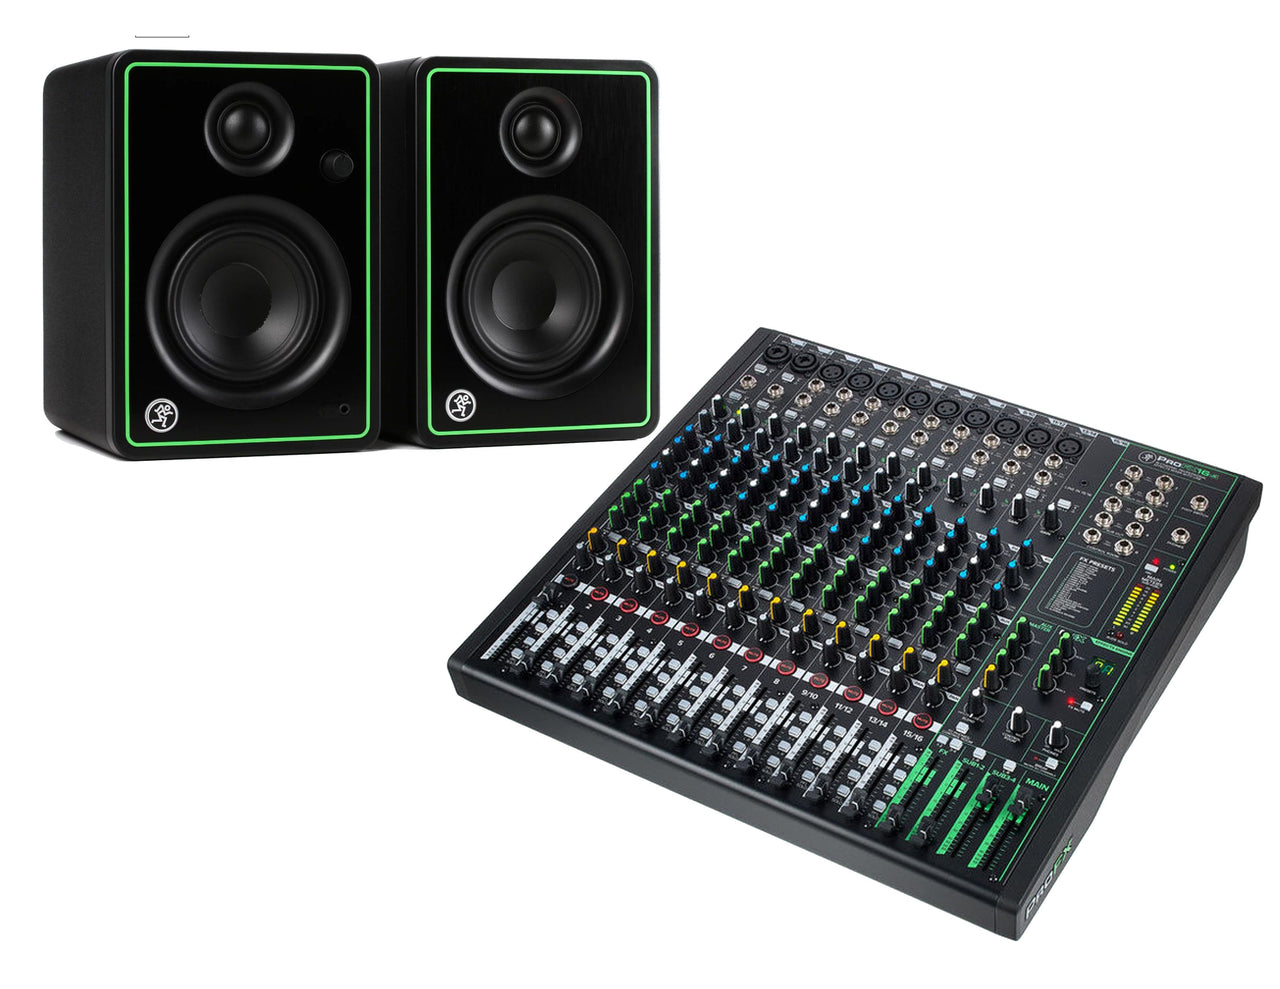 Mackie Bundle with CR3-XBT - Bluetooth Studio Monitor - Pair + ProFX16v3 16-channel Mixer with USB and Effects